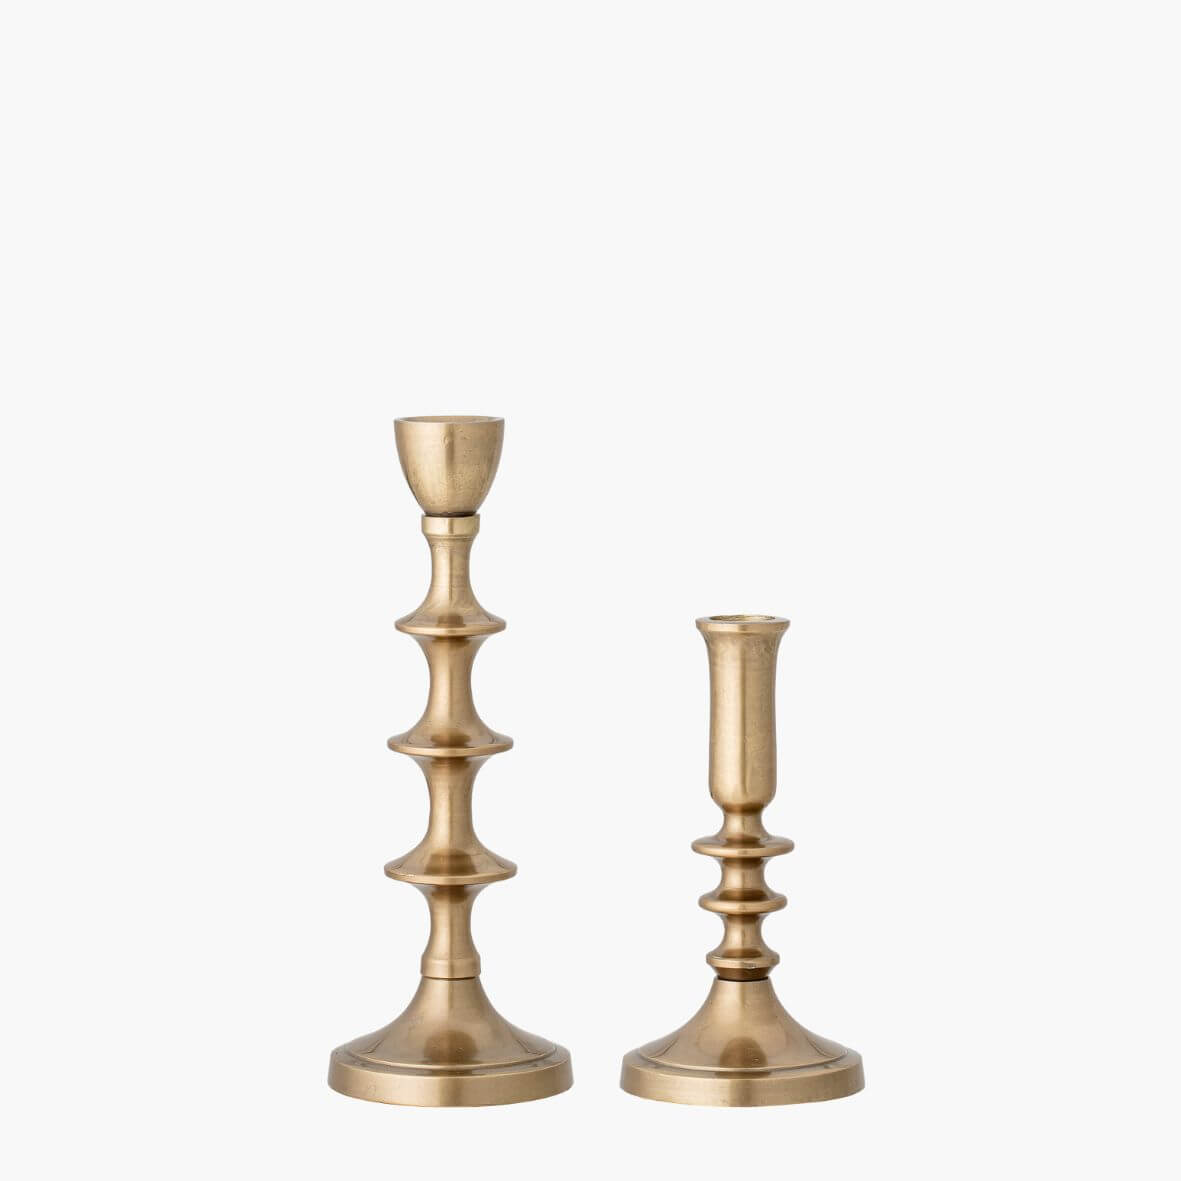 Brass Candlesticks with design in 2 heights on white background